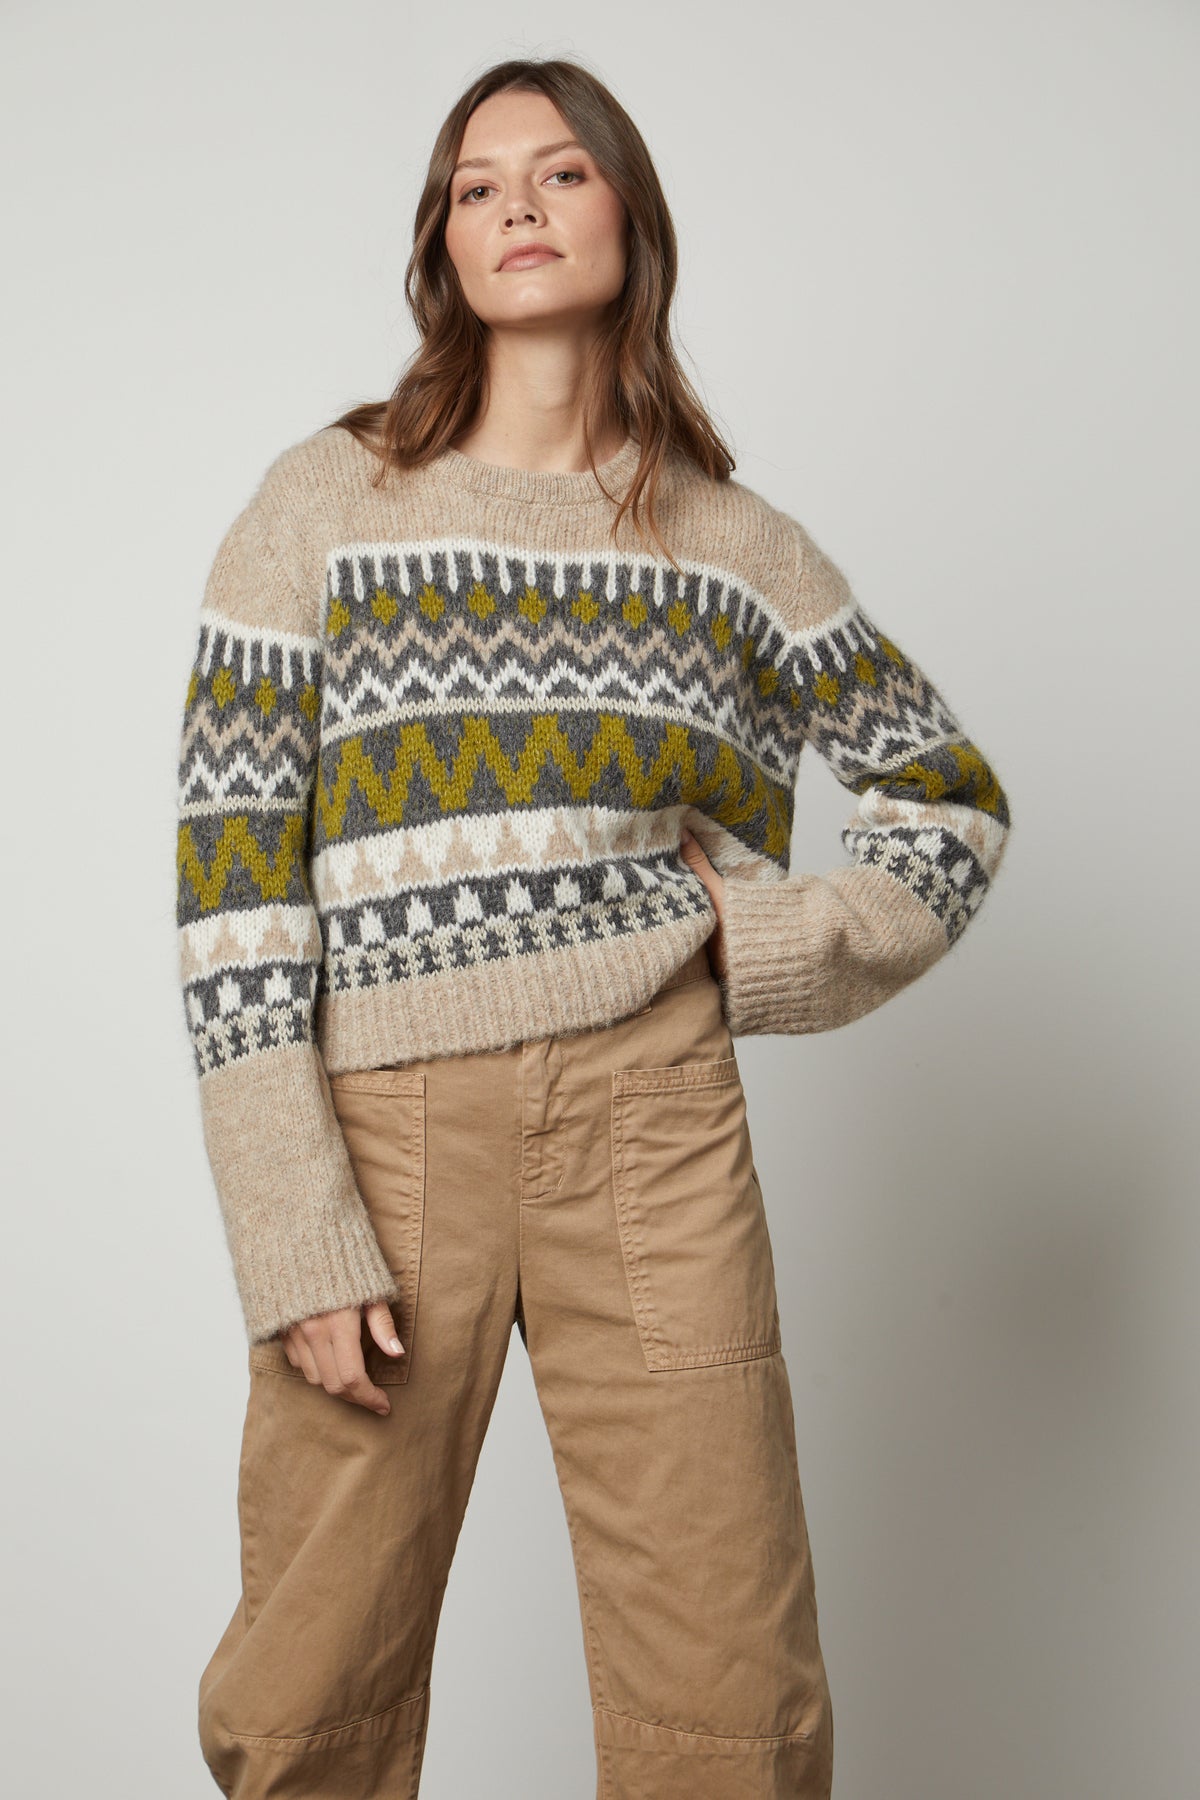 The model is wearing a cozy Velvet by Graham & Spencer MAKENZIE ALPACA CABLE KNIT CREW NECK SWEATER.-35626092953793